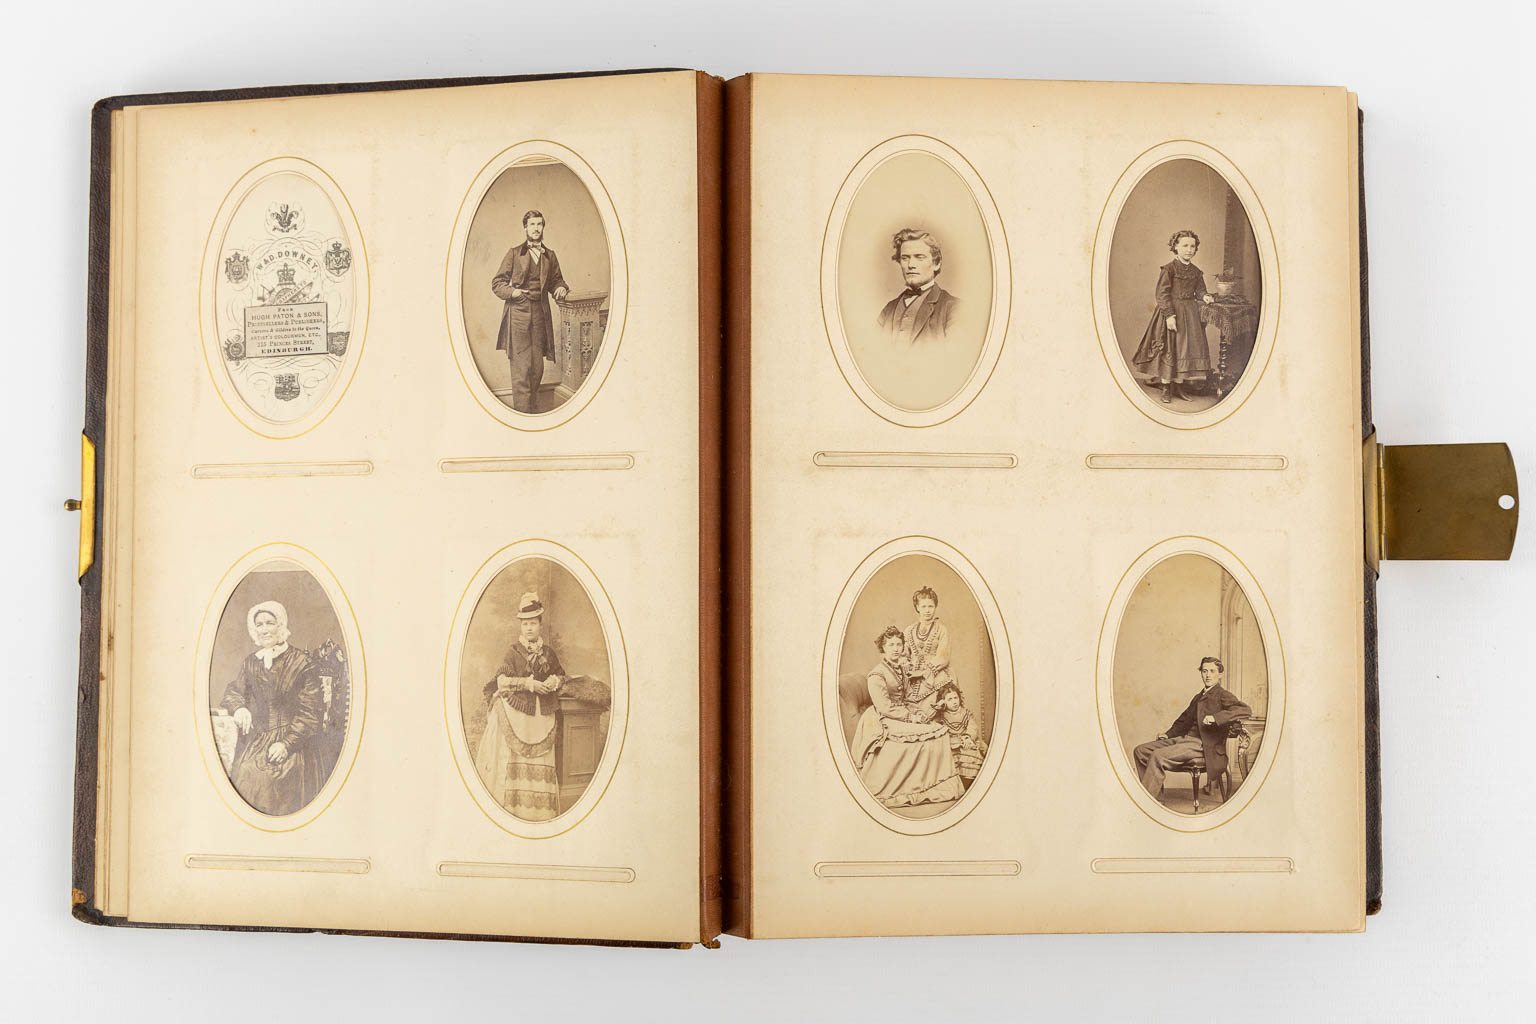 Five family photo books, of which 1 has a music box. (W:24 x H:30 cm) - Image 9 of 14